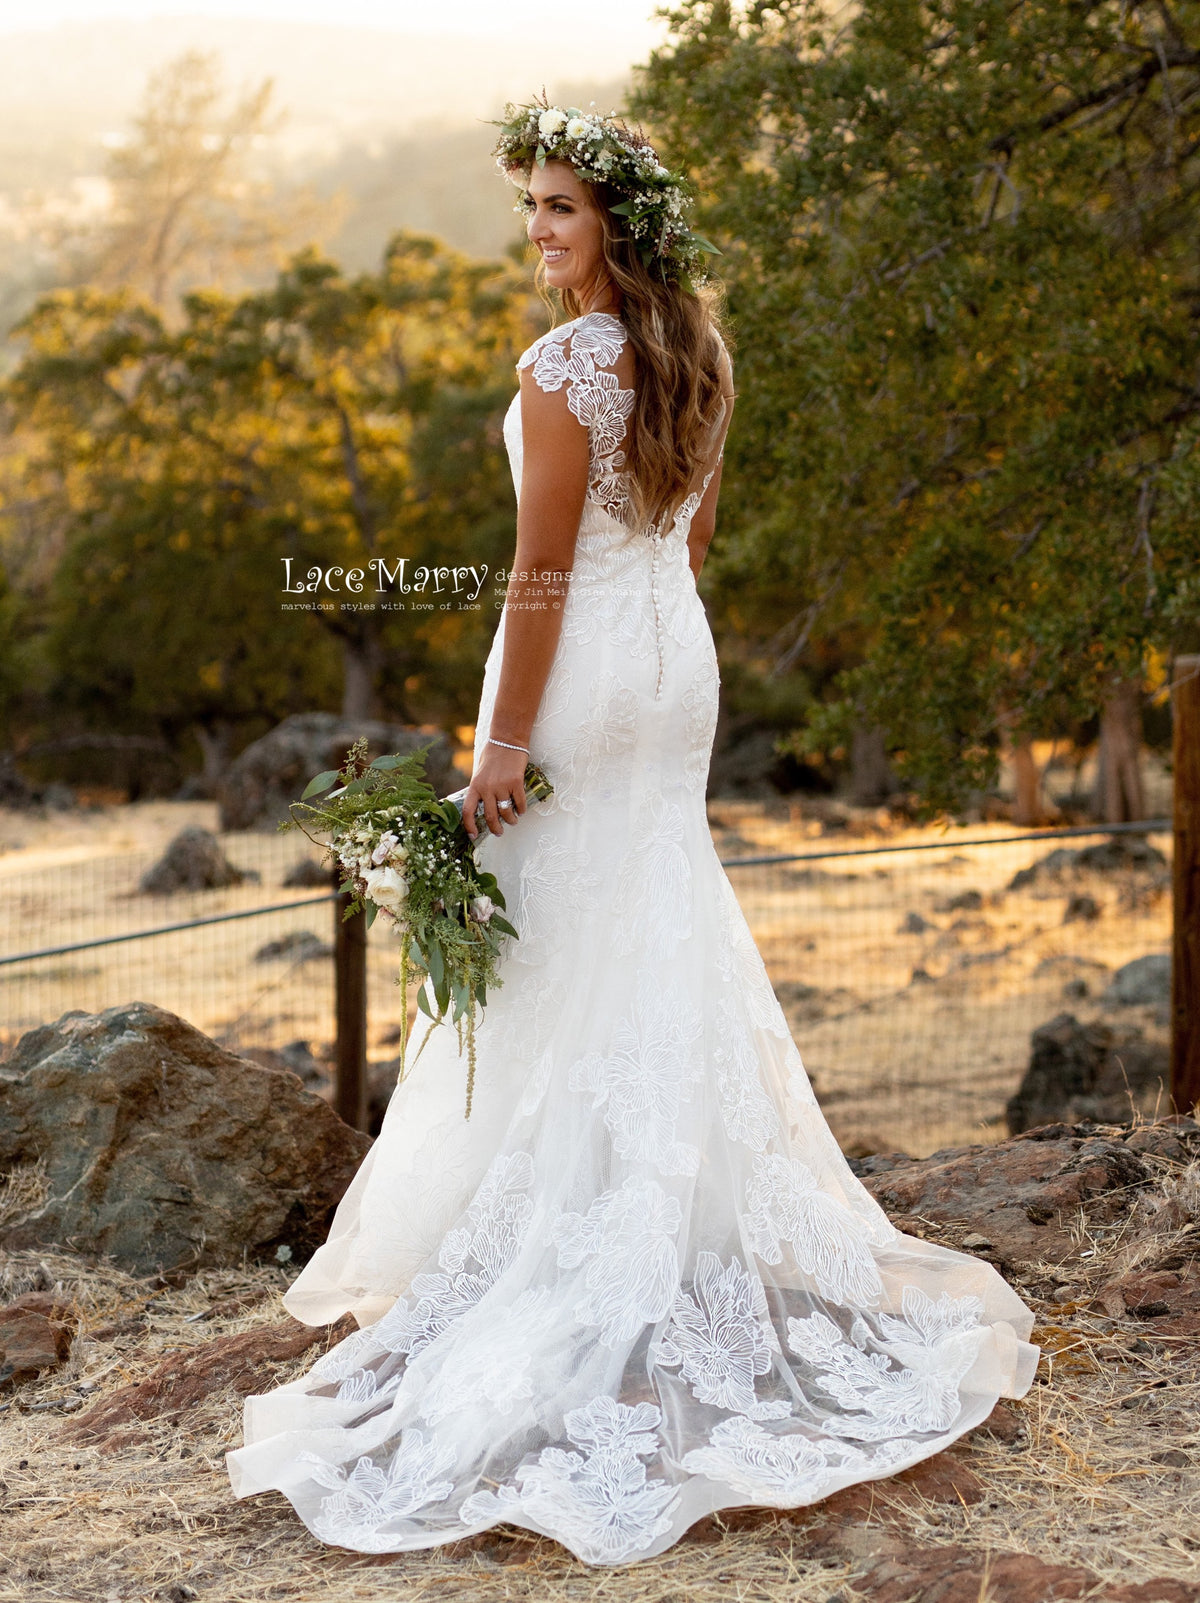 Amazing Lace Wedding Dress for your Rustic Wedding